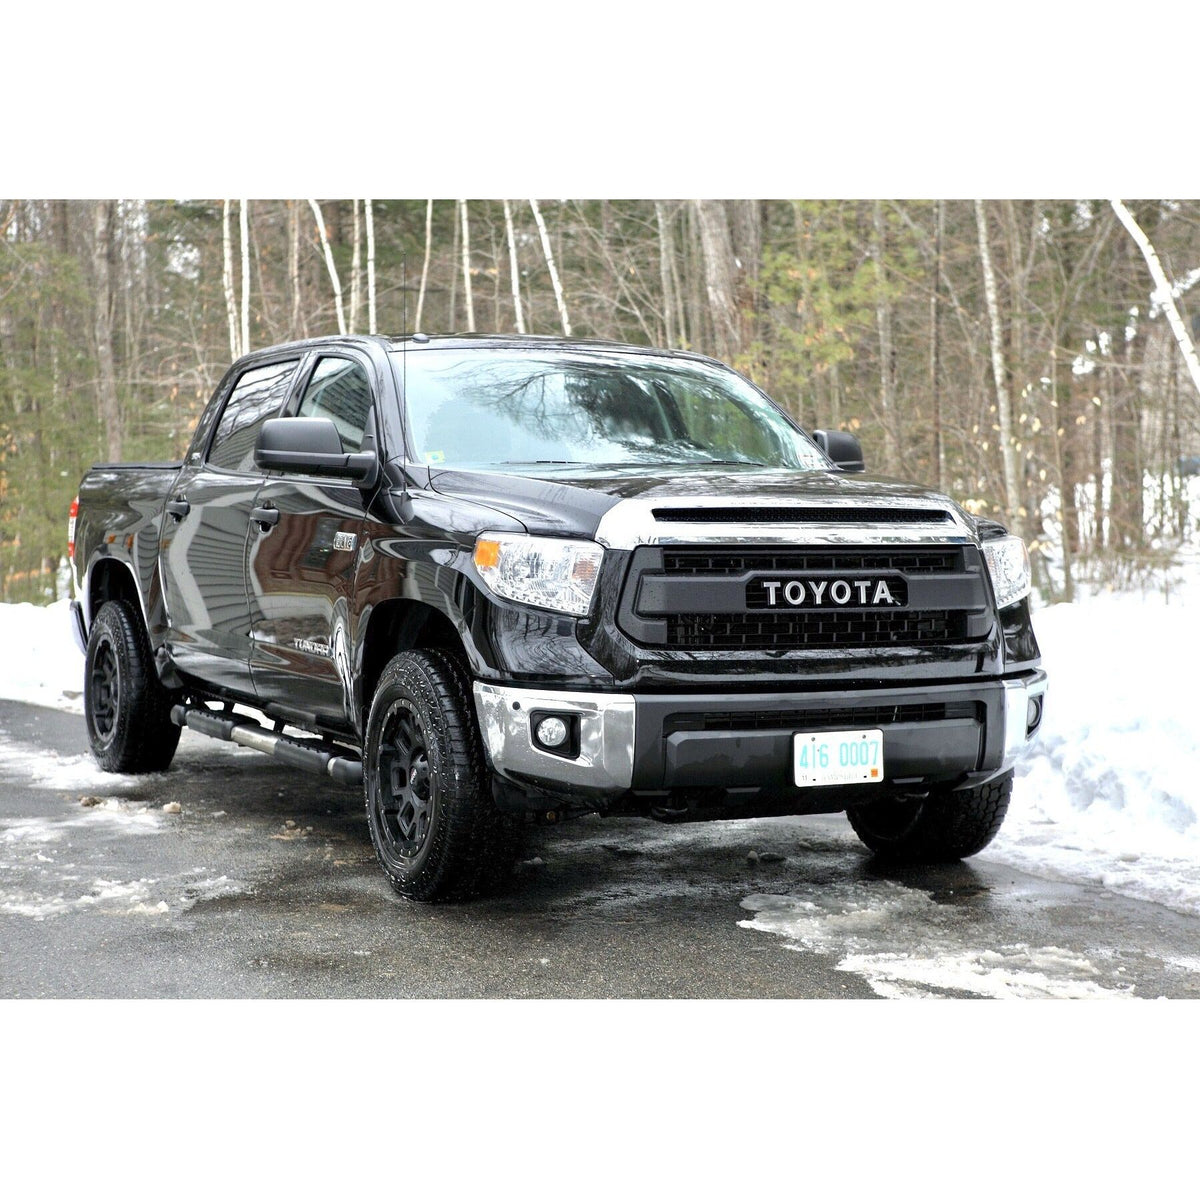 Toyota Tundra | 2014 - 2017 | TRD Pro Grille | - Truck Accessories Guy